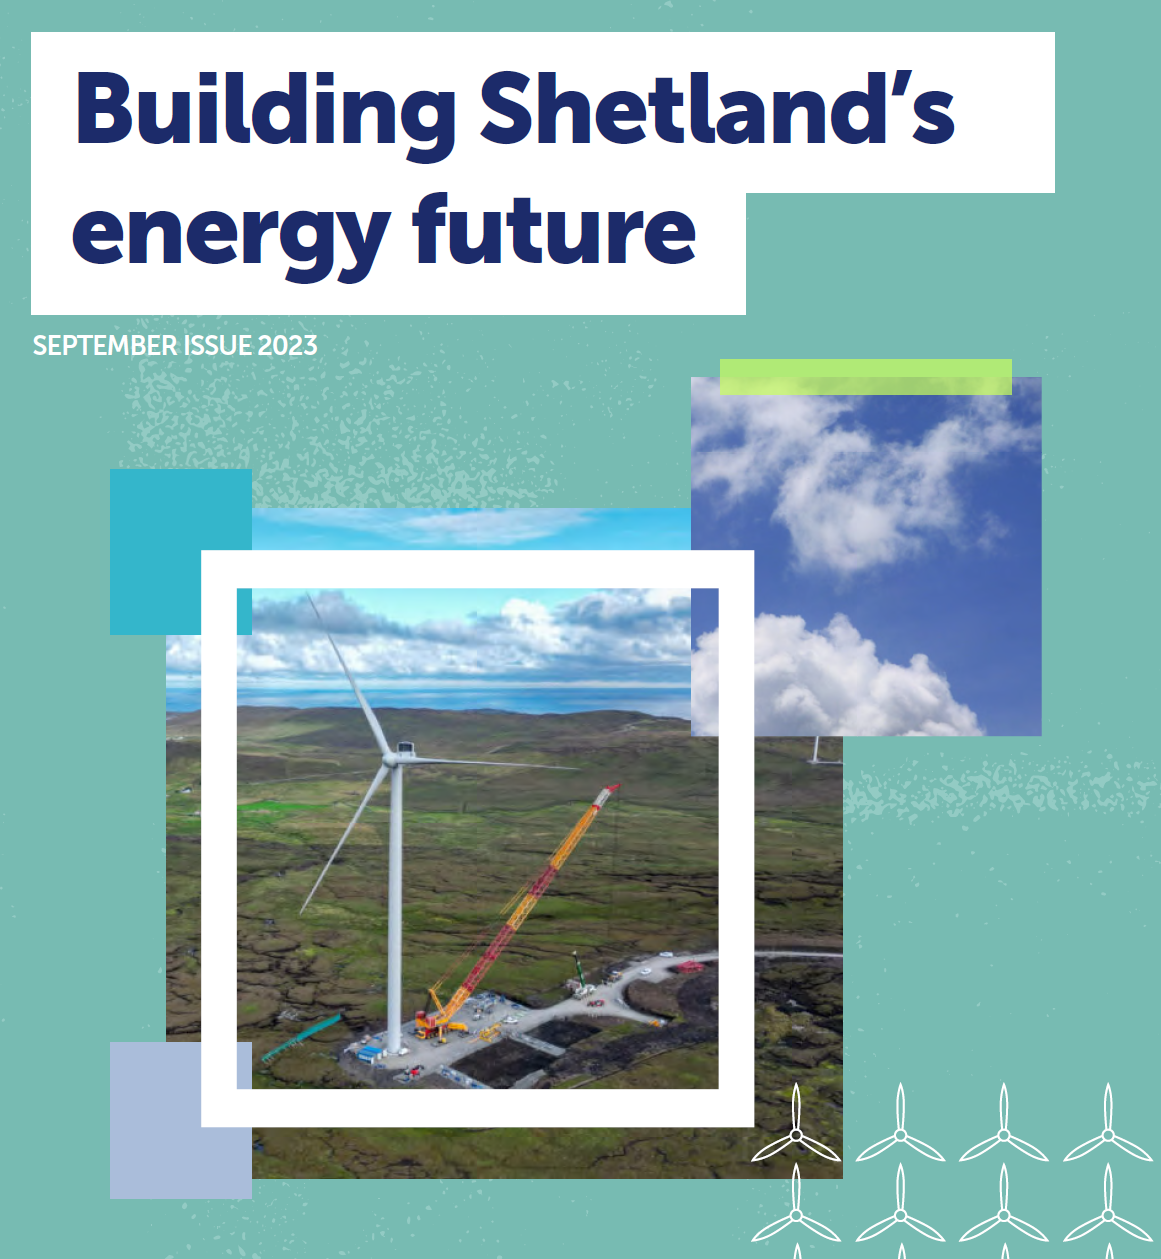 A poster titled "Building Shetland's energy future. September Issue 2023."